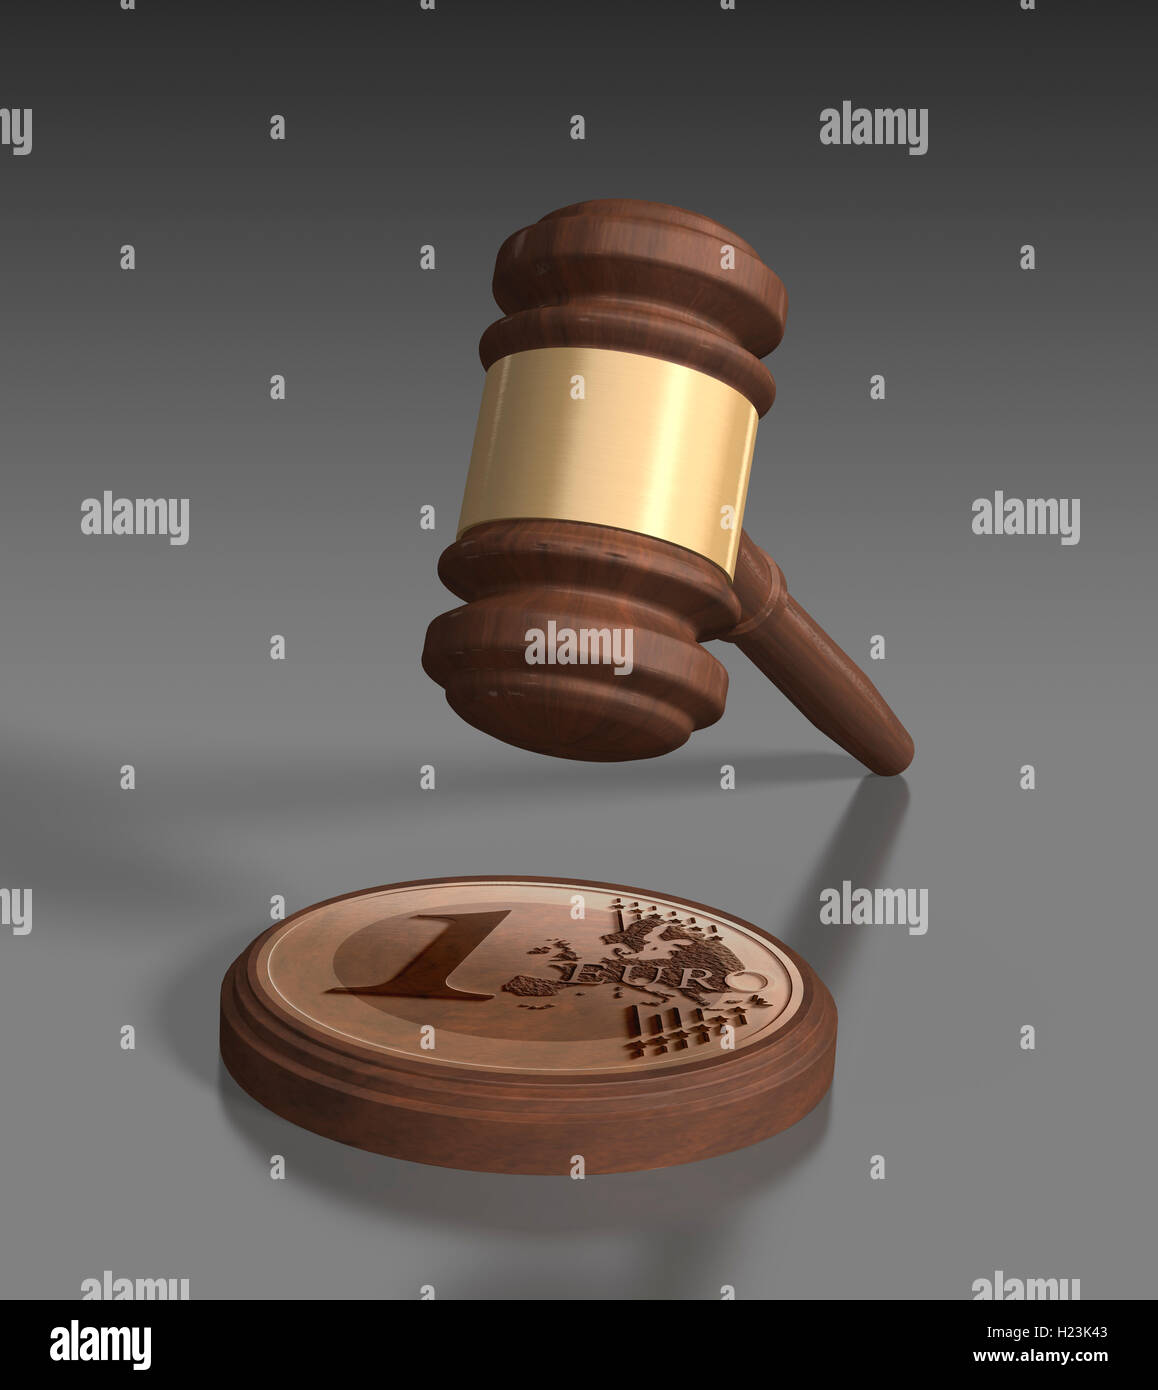 Gavel in front of grey background, 1 euro coin on block Stock Photo